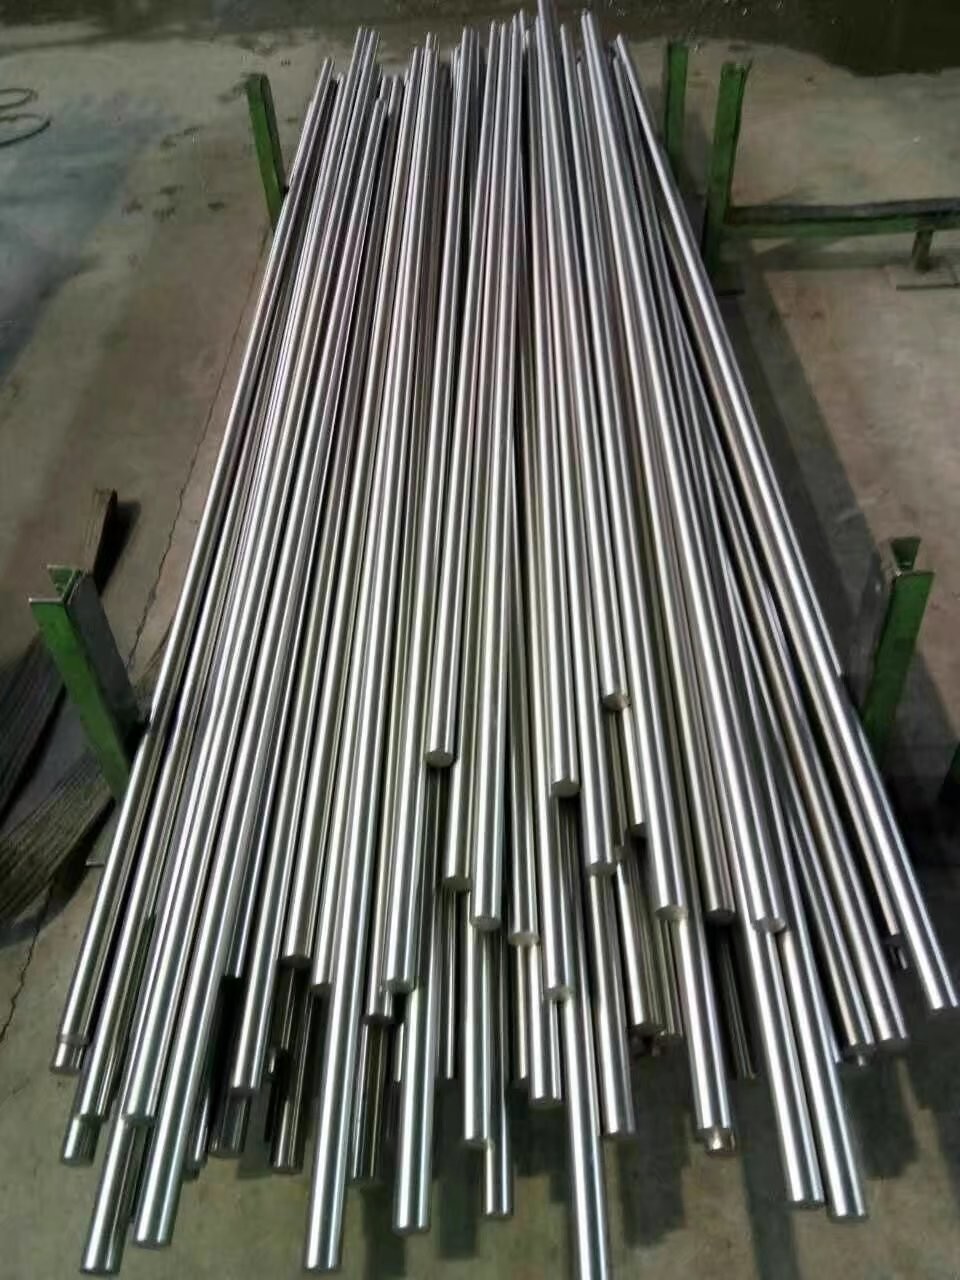  Industrial Hastelloy C276 Welding Rod , Hastelloy C276 Round Bar For Chemical Processing Manufactures